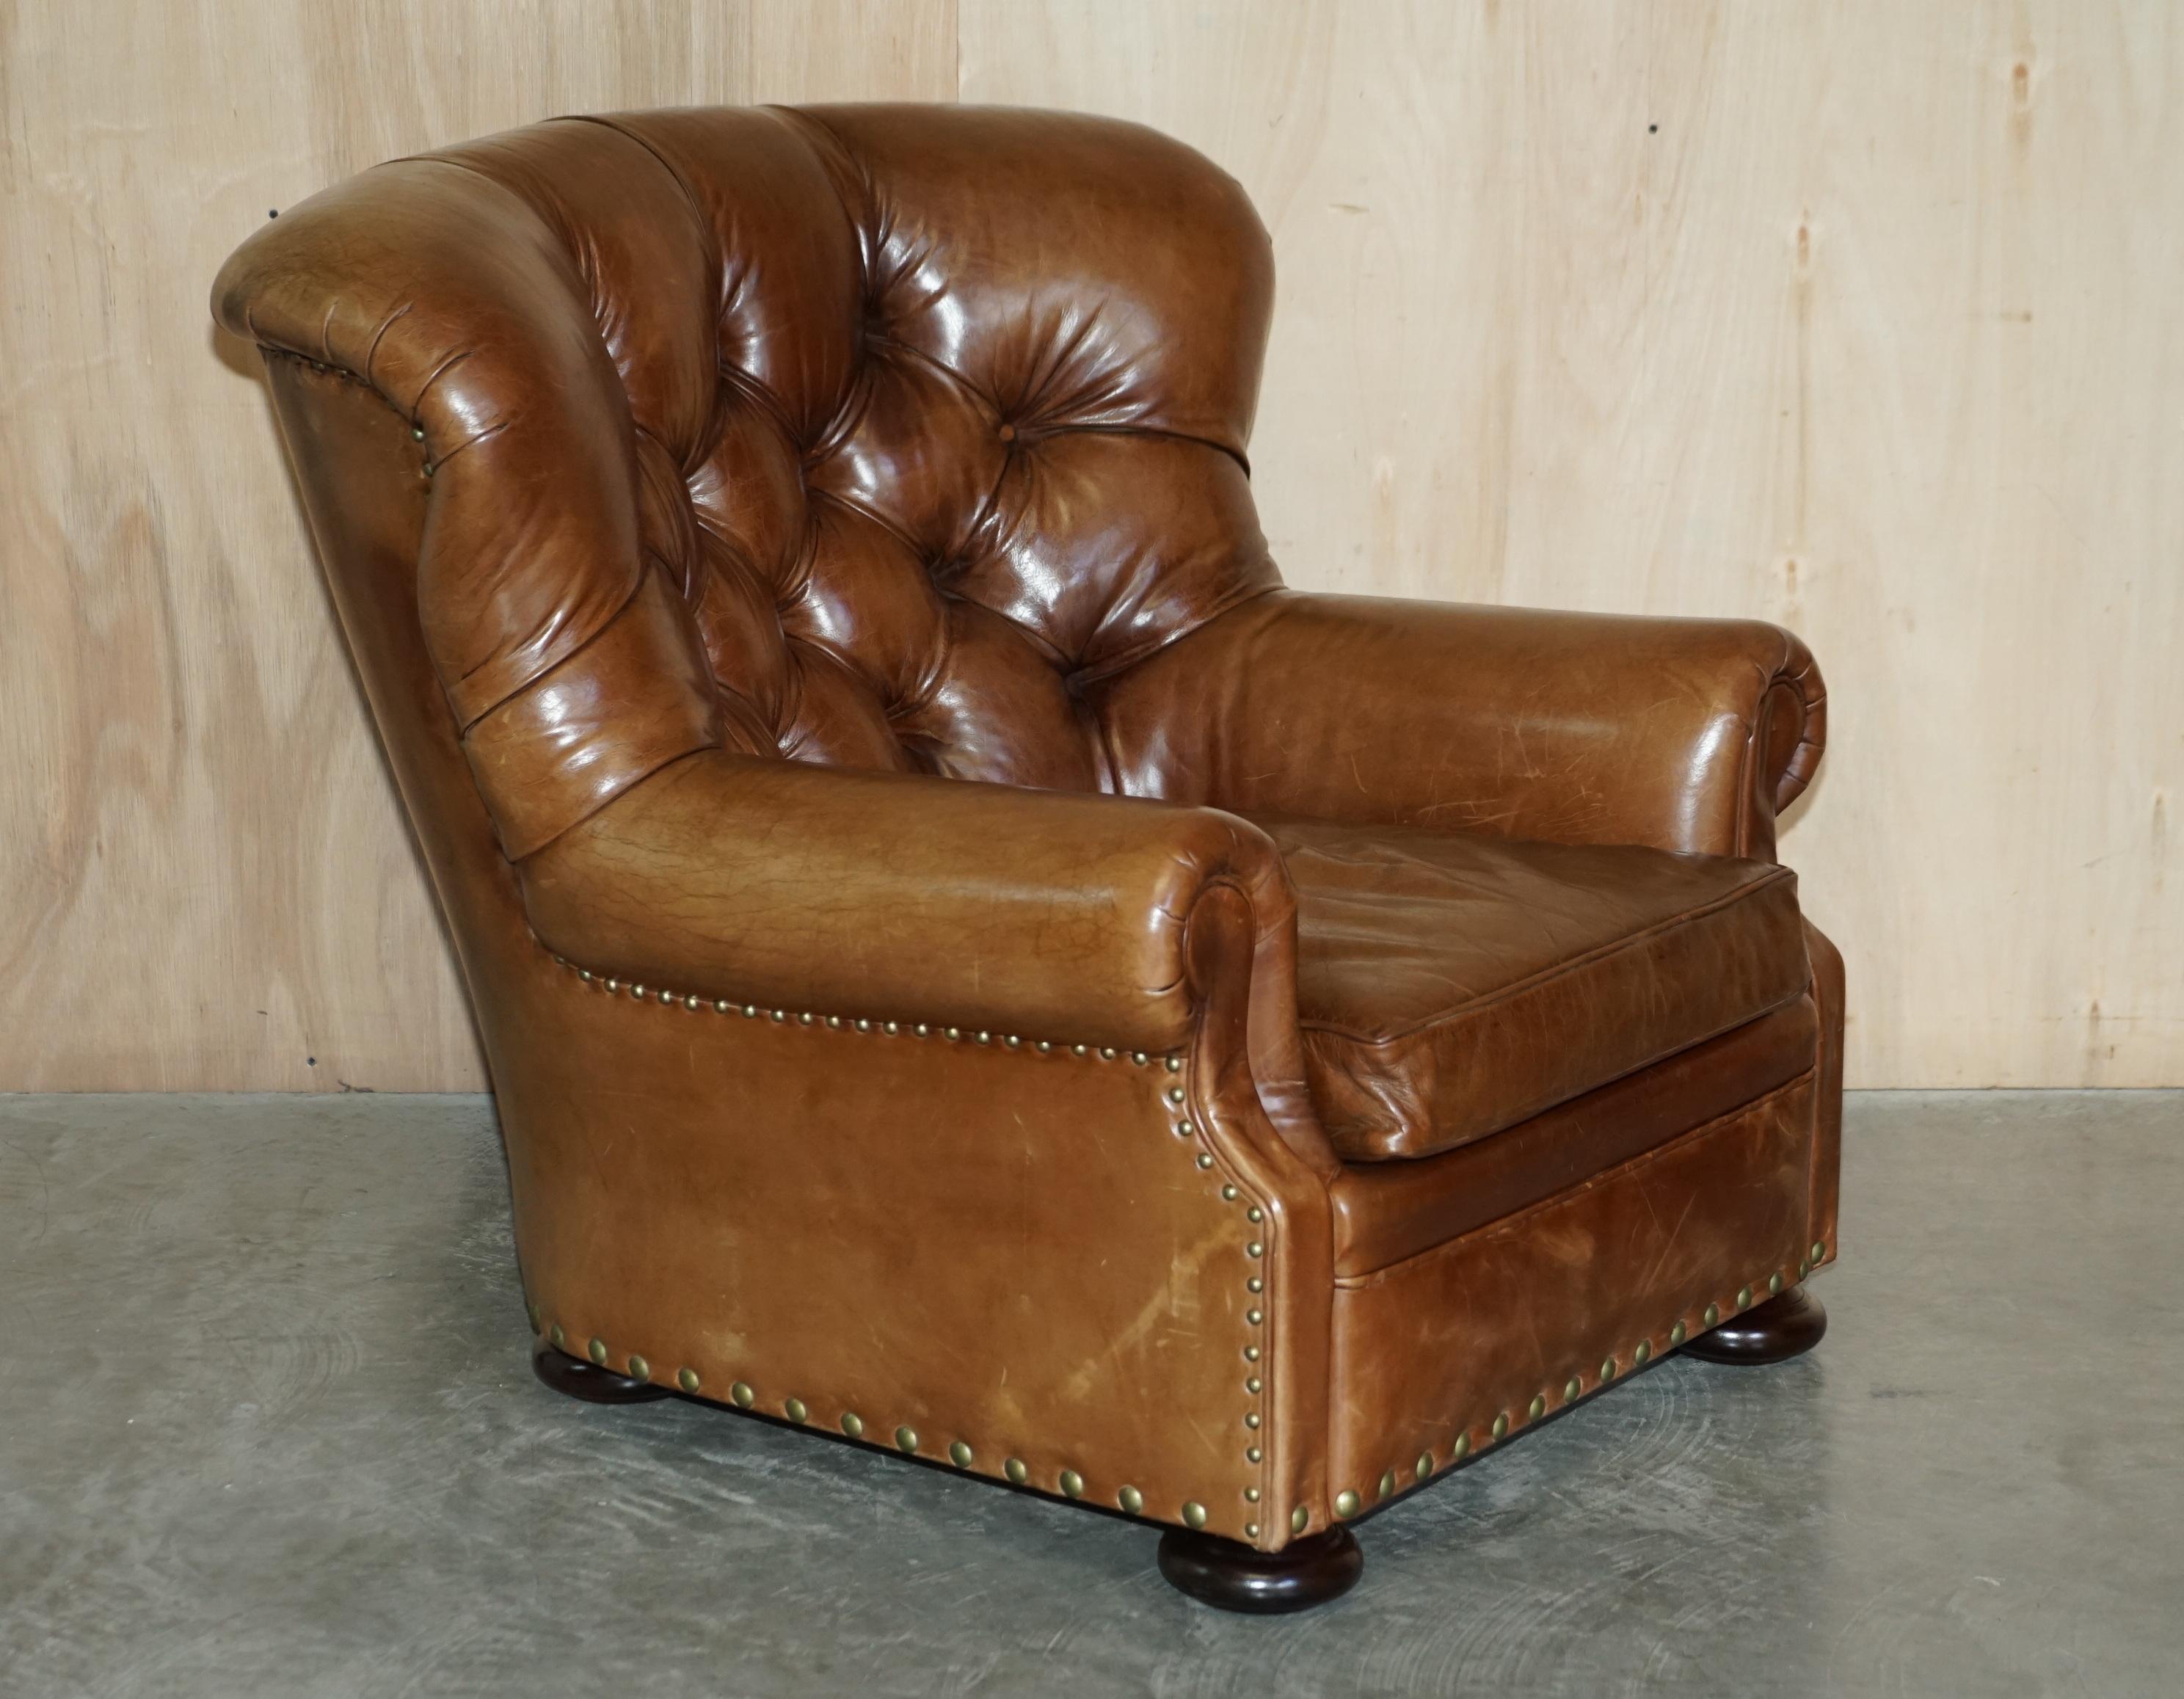 We are delighted to offer for sale this stunning original Ralph Lauren Writers armchair and matching ottoman RRP £15,745 in aged brown vintage leather armchair.

A fantastic iconic armchair, the original has graced many a front page in its time, it